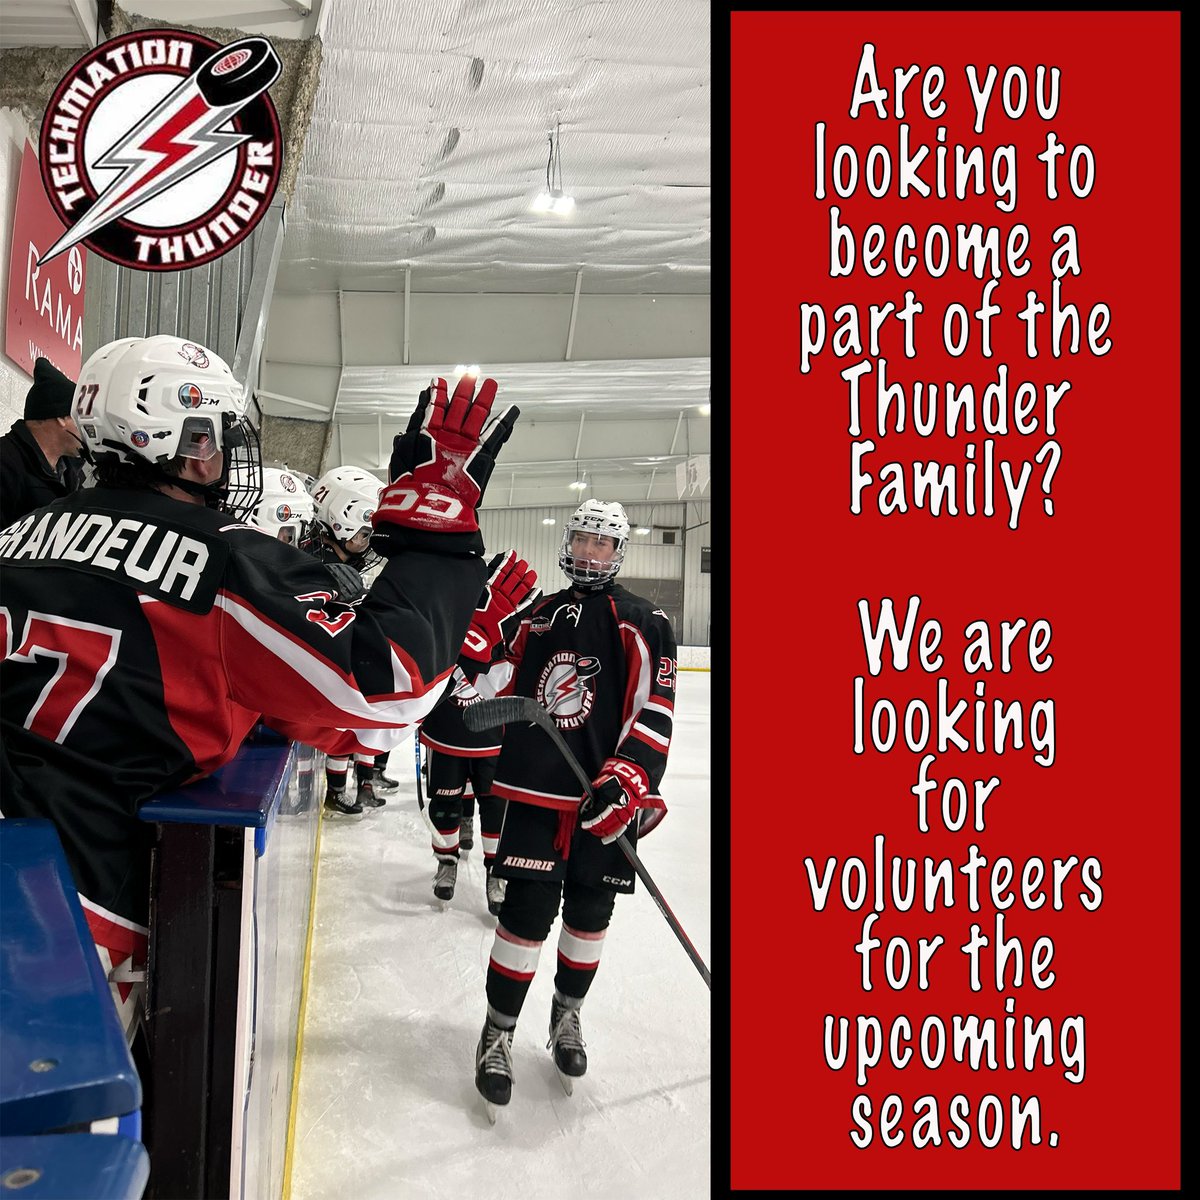 Interested in helping out the team this upcoming season? We need volunteers!! Please email airdriethunder@shaw.ca if you are looking to become a part of the family 🌩️🌩️ #airdriethunder